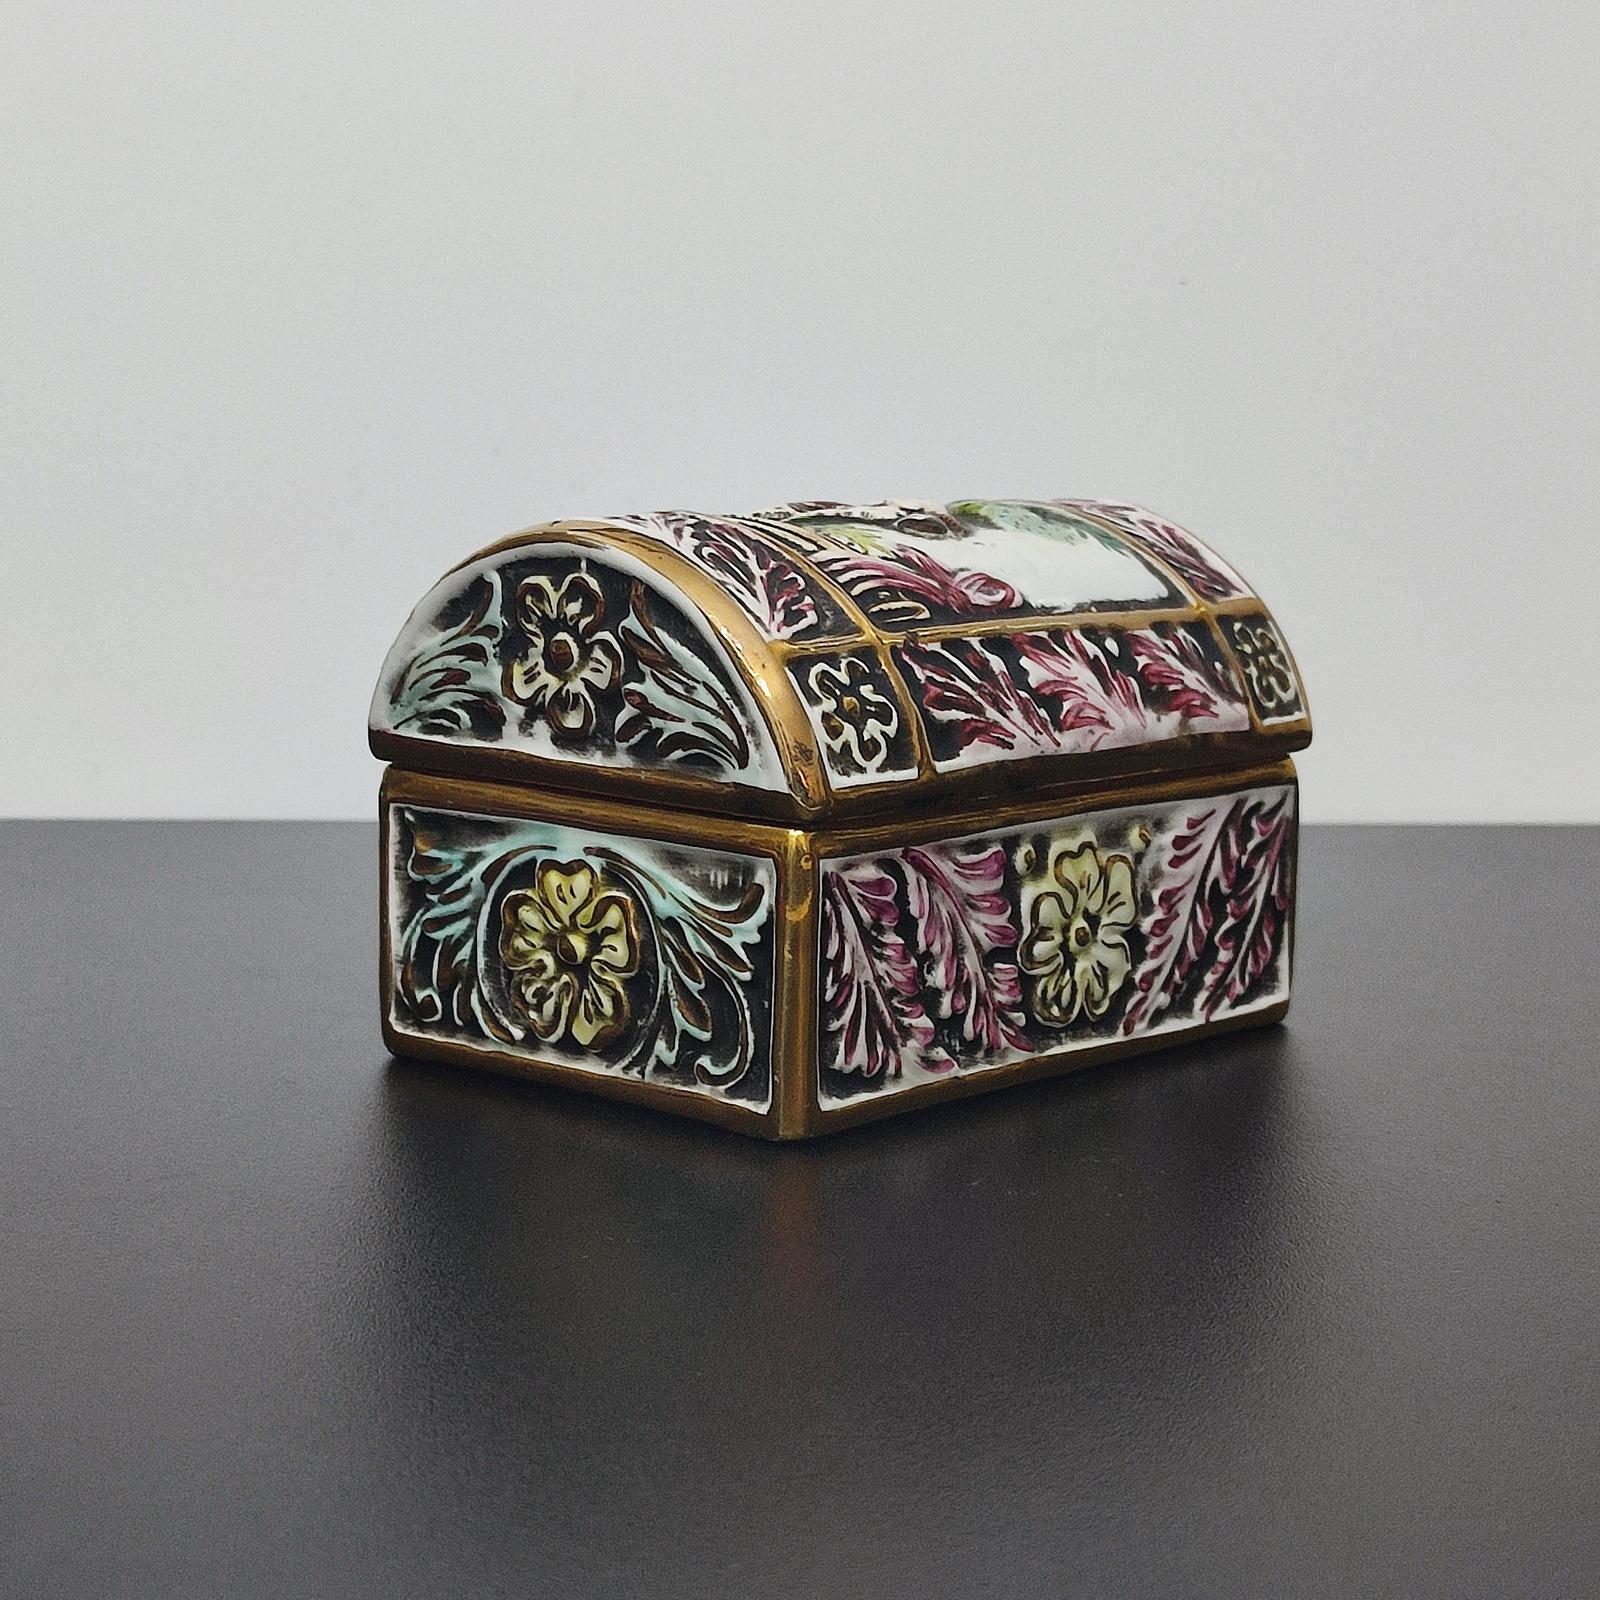 Capodimonte Porcelain Chest, Jewelry Box, Italy Mid 20th Century - FREE SHIPPING For Sale 2